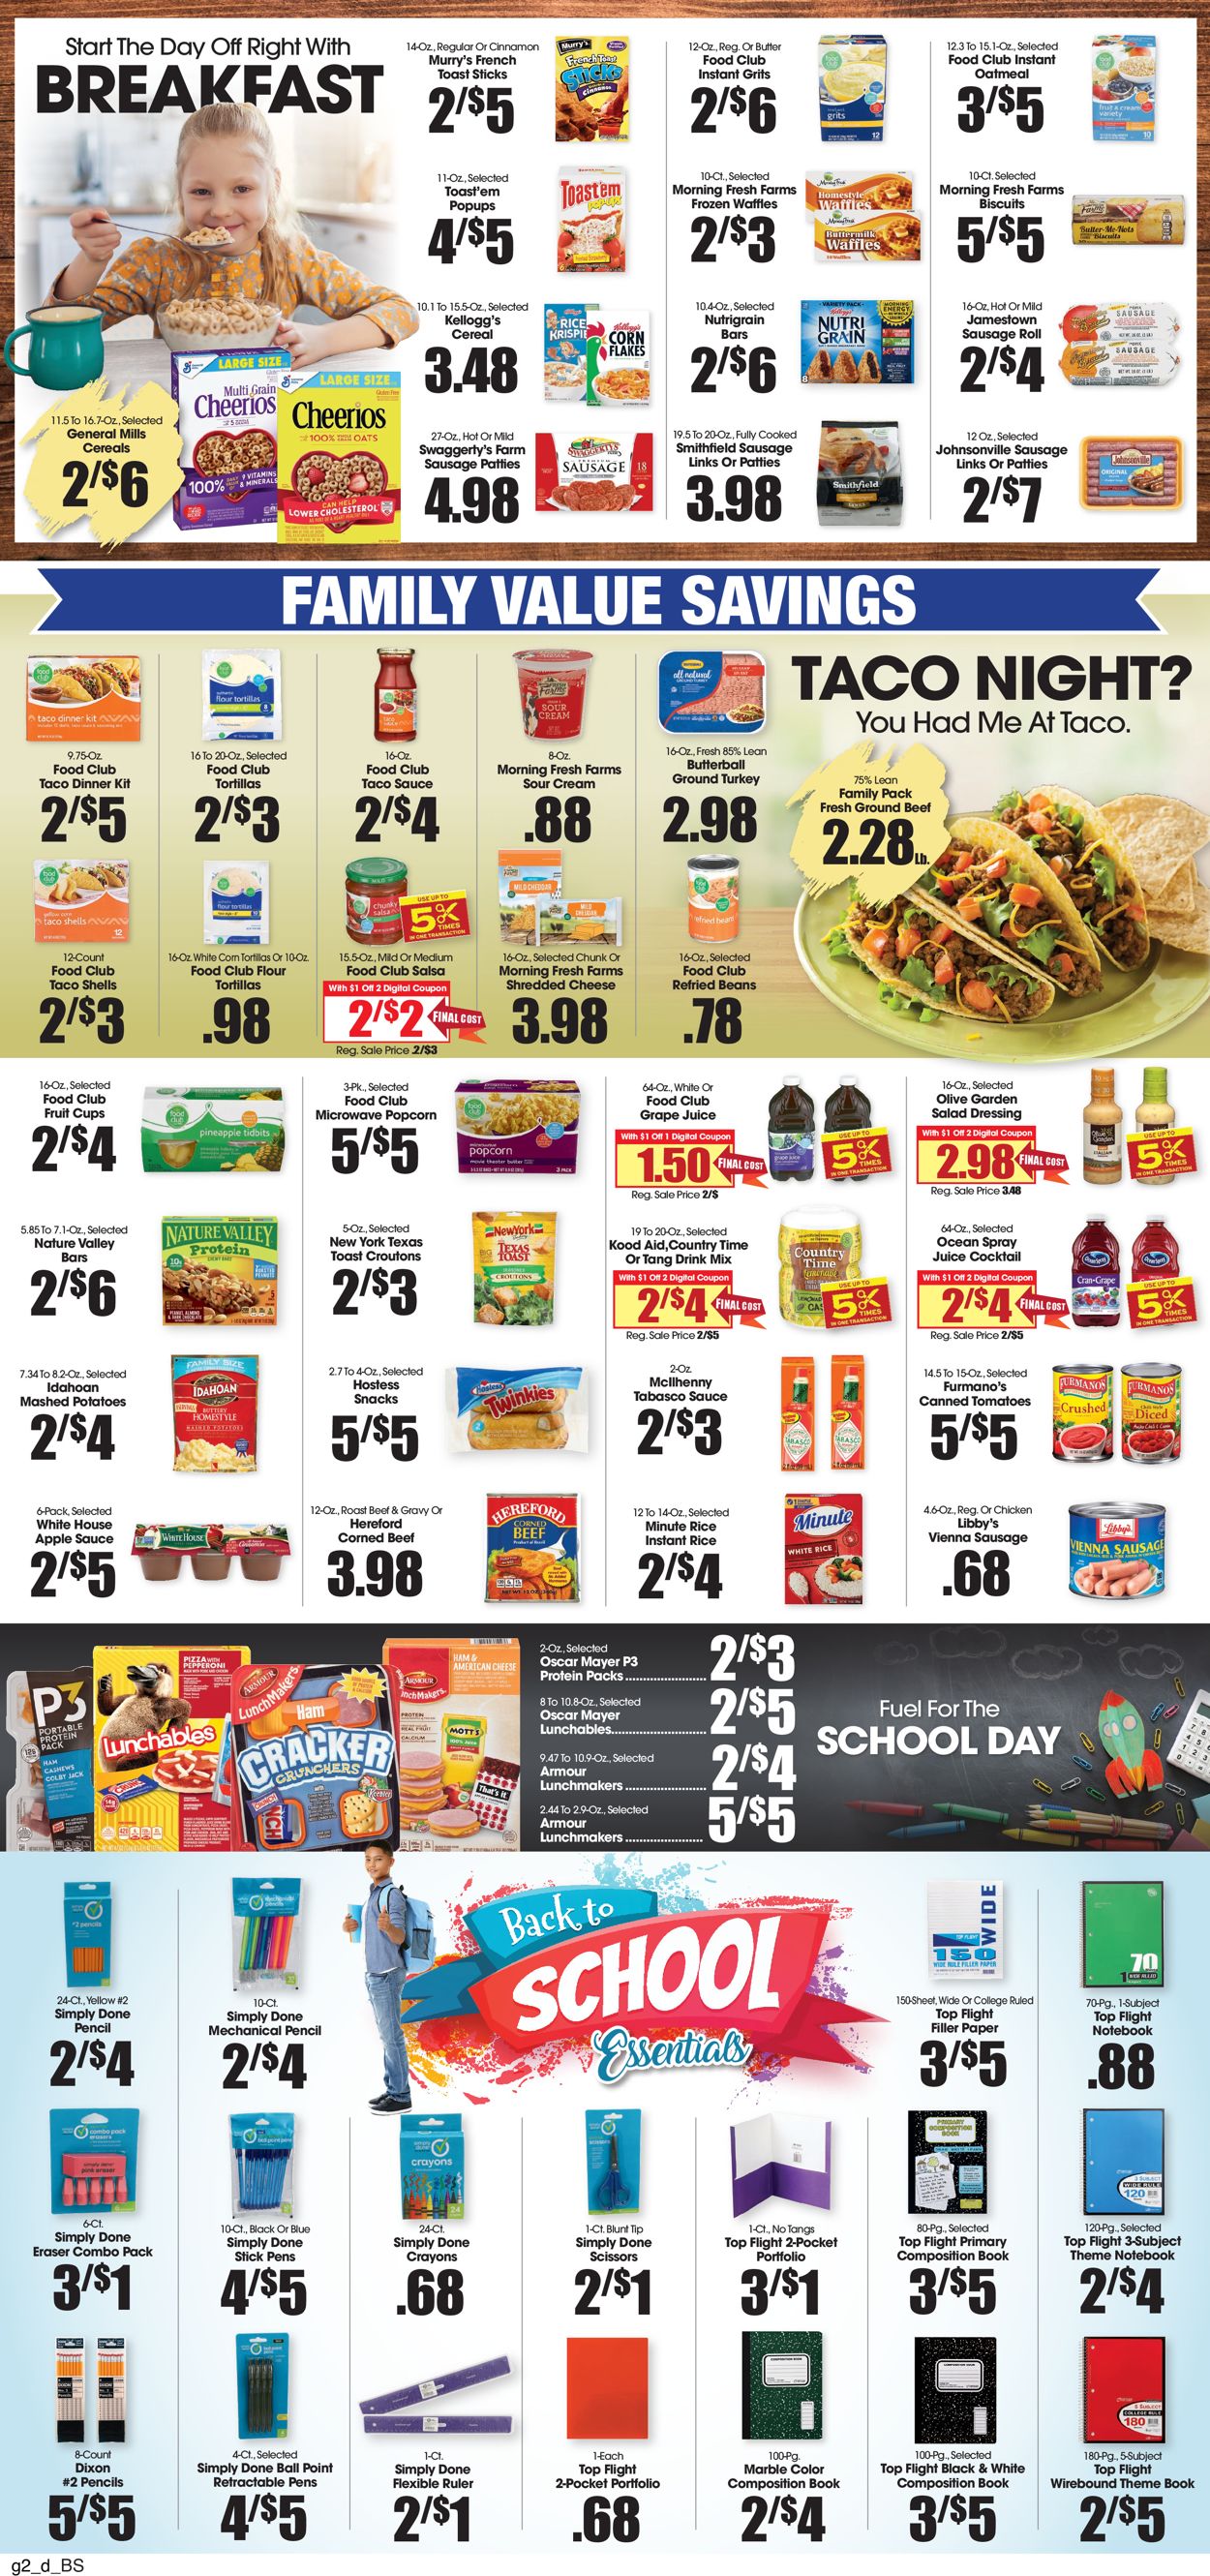 Food King Ad from 08/18/2021